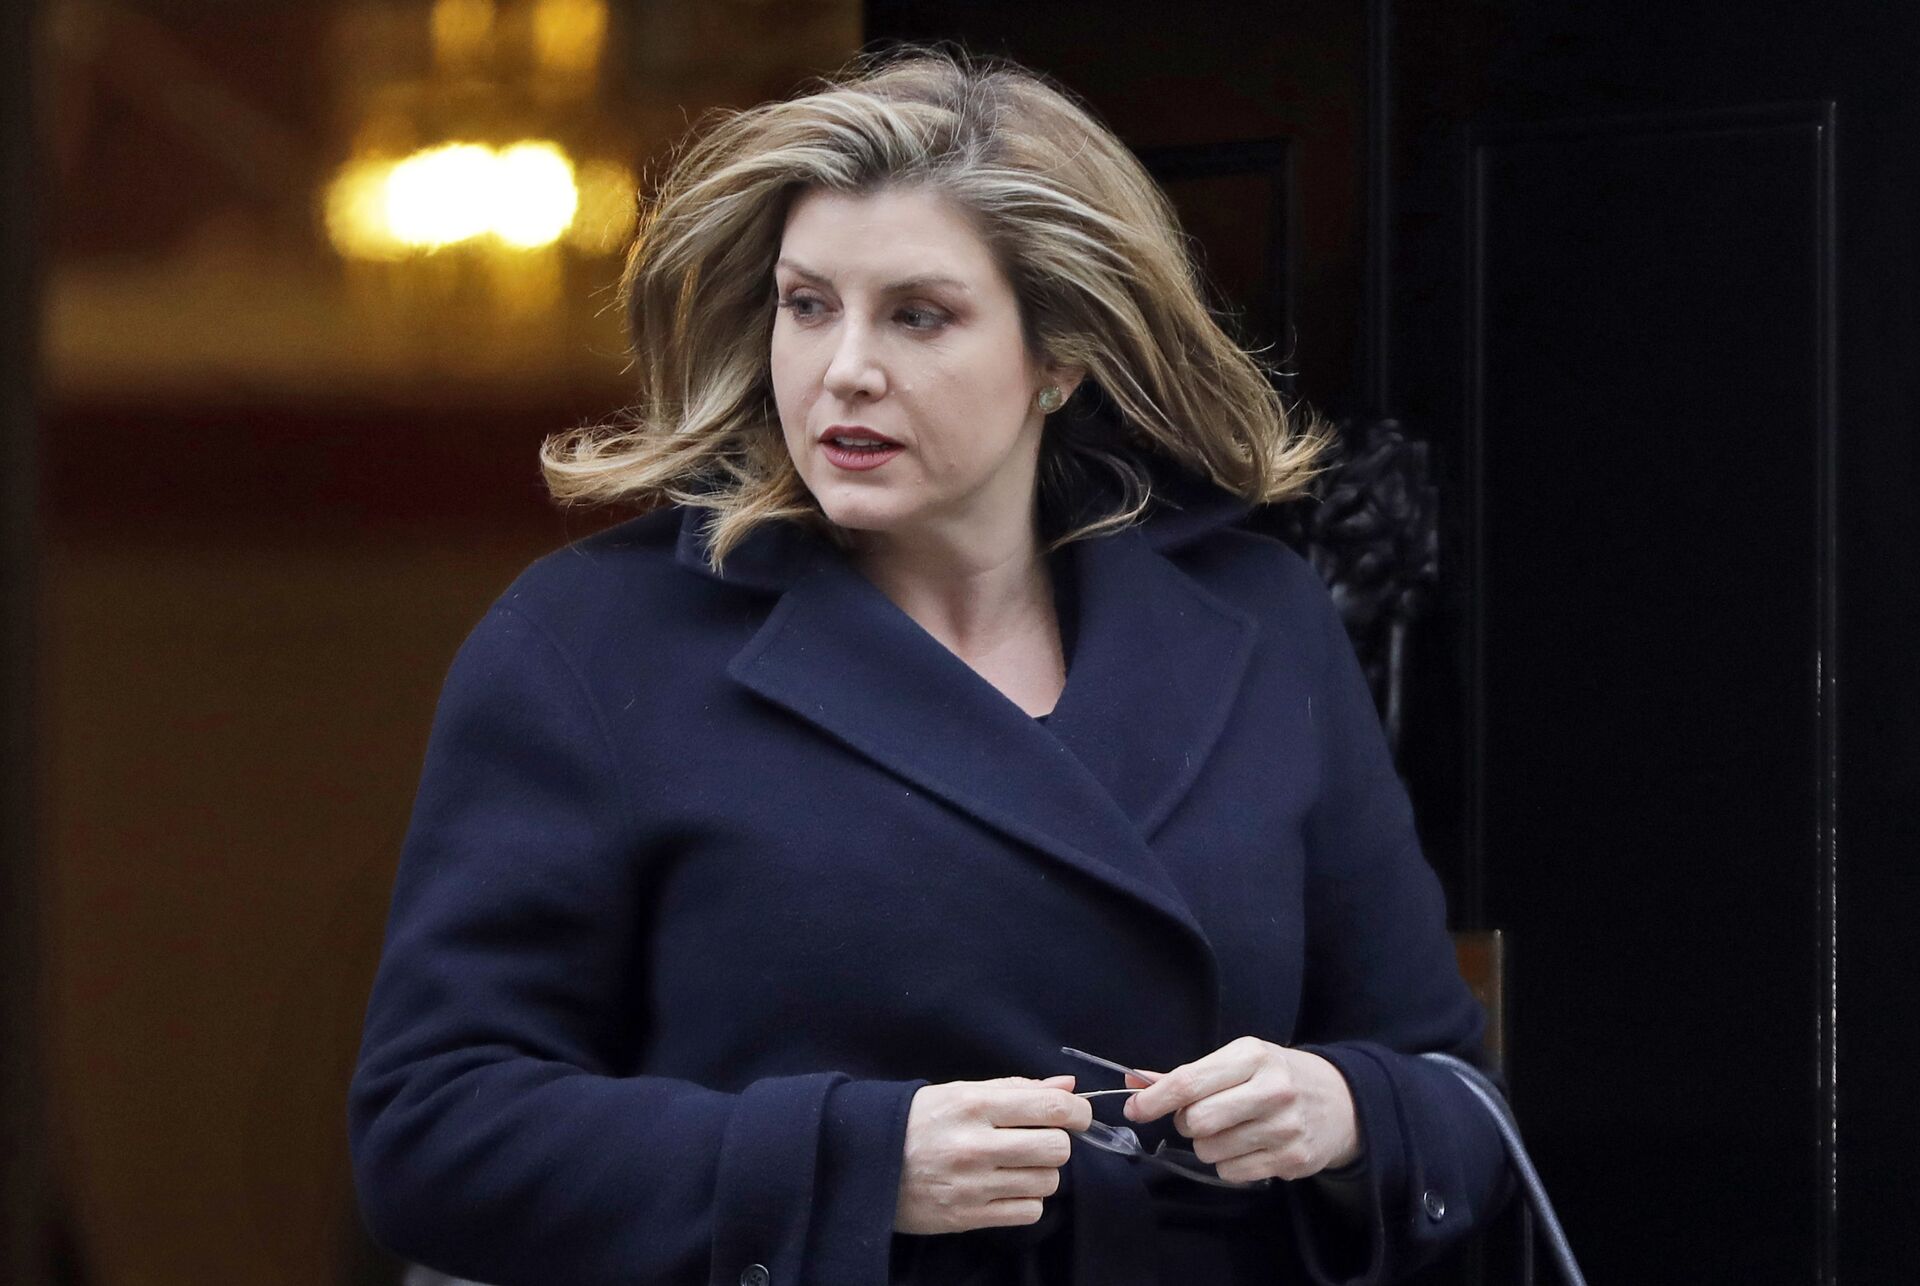 In this file photo dated Tuesday, Jan. 29, 2019, Government minister Penny Mordaunt leaves after a Cabinet meeting at Downing Street in London. The international development secretary, Mordaunt has been appointed to replace Gavin Williamson who was sacked Wednesday May 2, 2019, as U.K. defense chief.  - Sputnik International, 1920, 06.07.2022